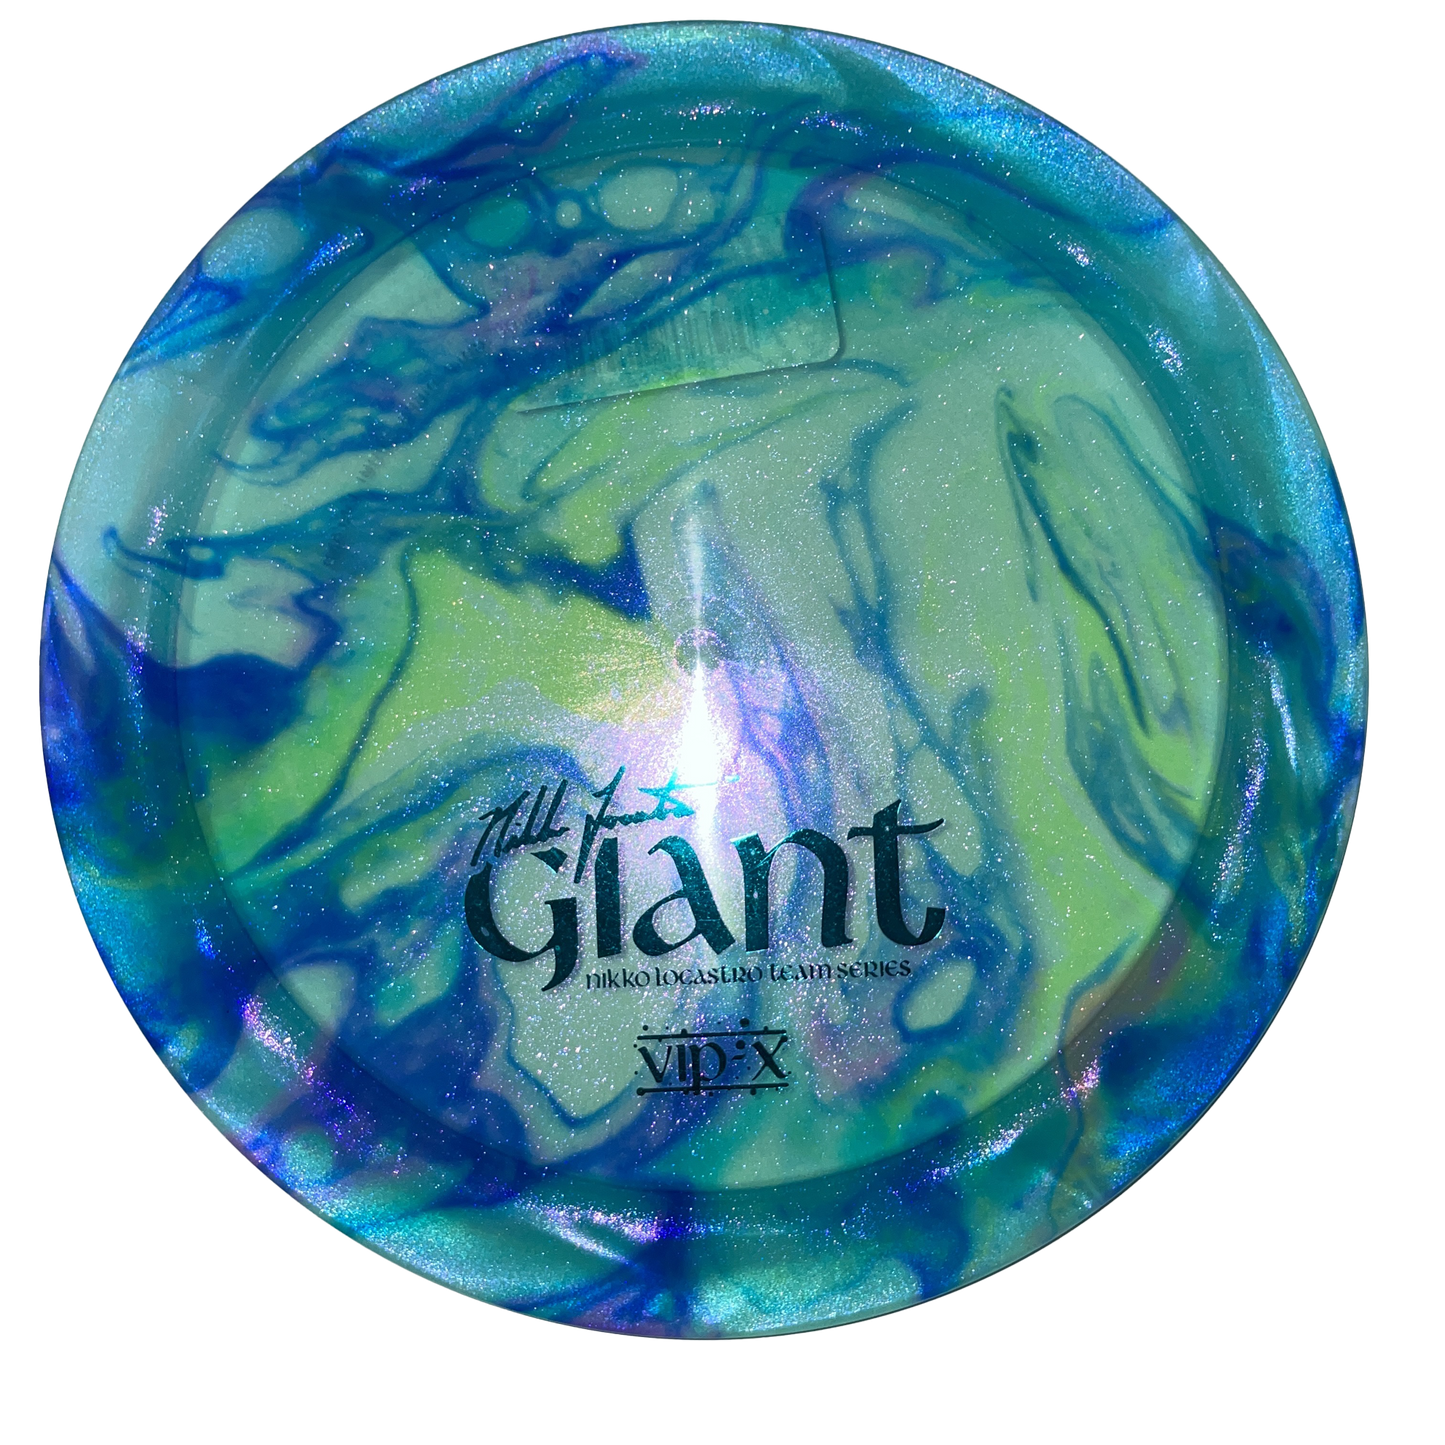 Custom Dyed Westside VIP-X Glimmer Nikko LocastroTeam Series  Giant - Distance Driver